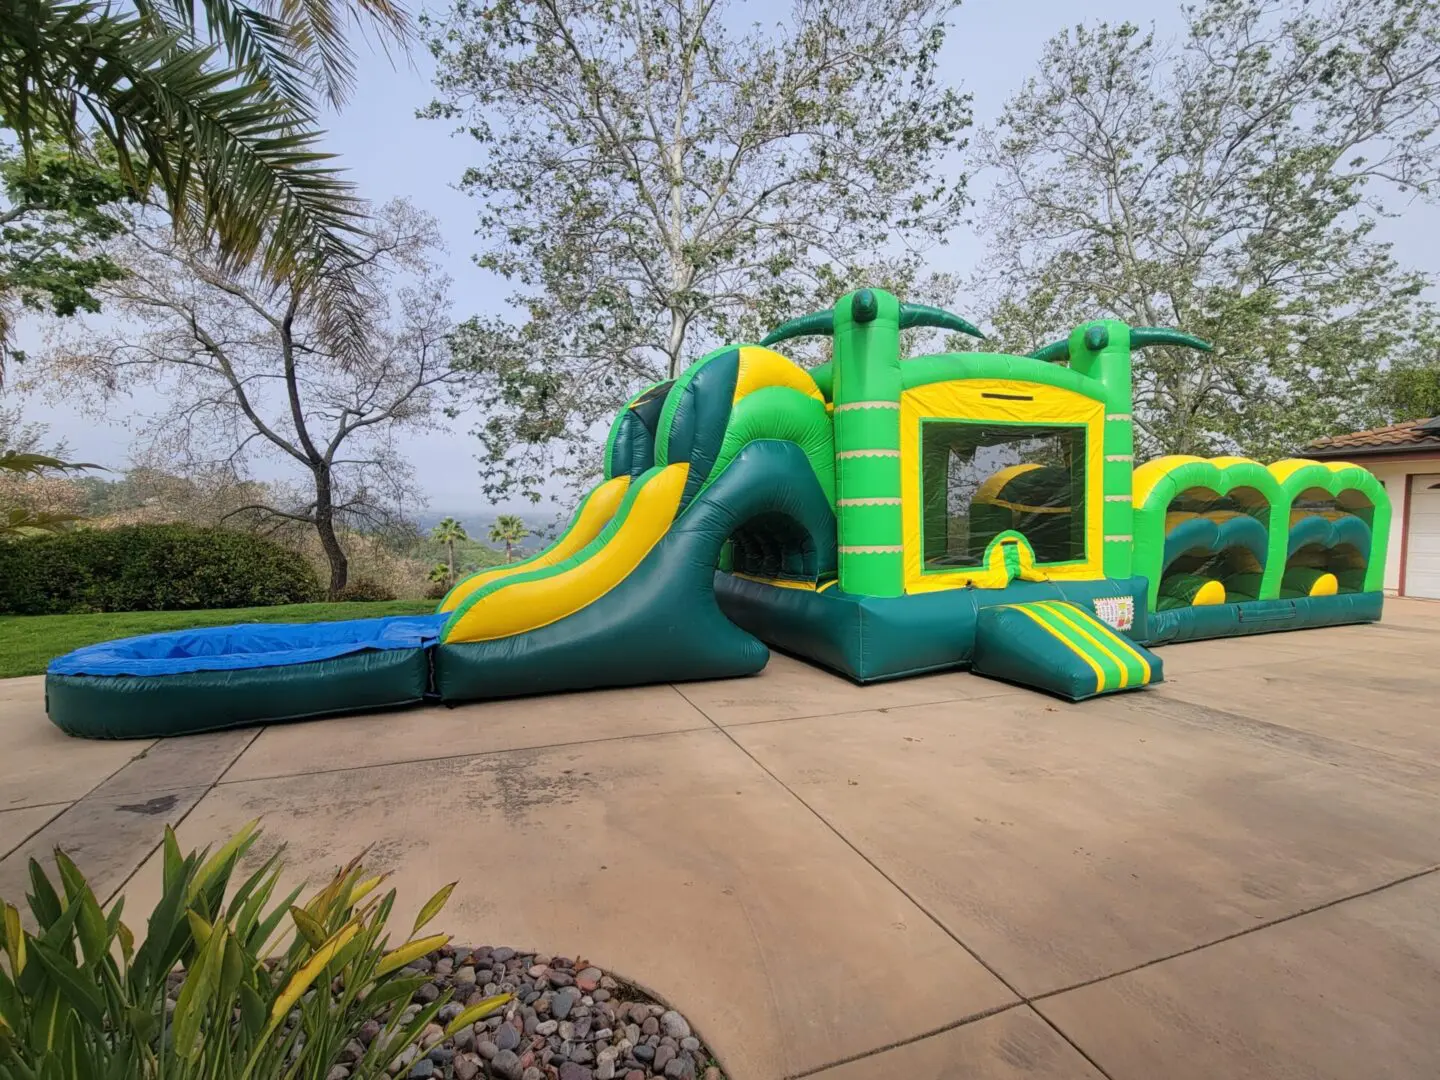 A green and yellow inflatable slide in the middle of a driveway.